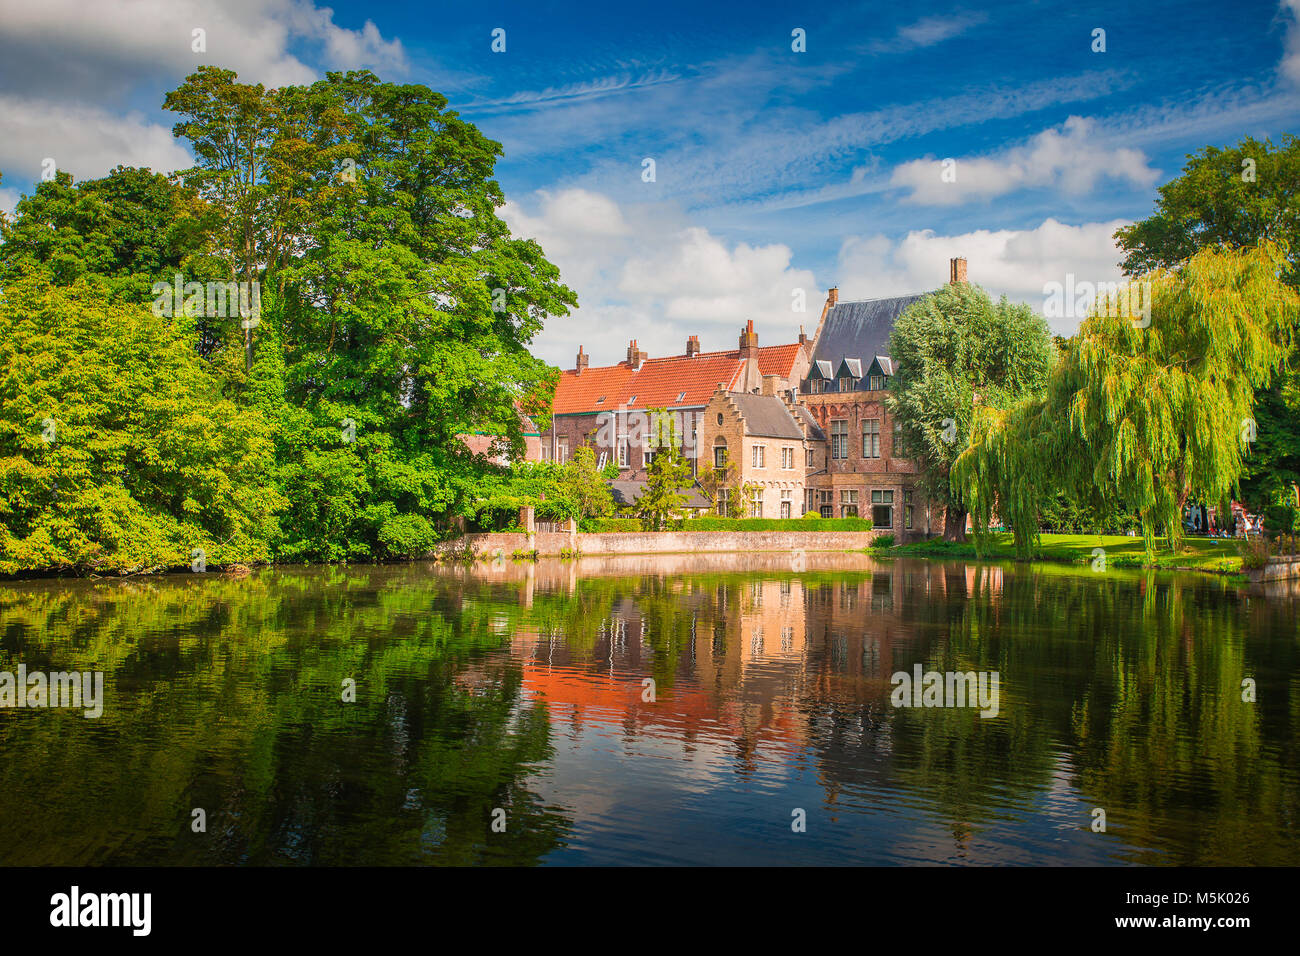 Sunny Brugge cityscape. Buildings of Bruges reflected in lake. Historical center of Europe. Stock Photo